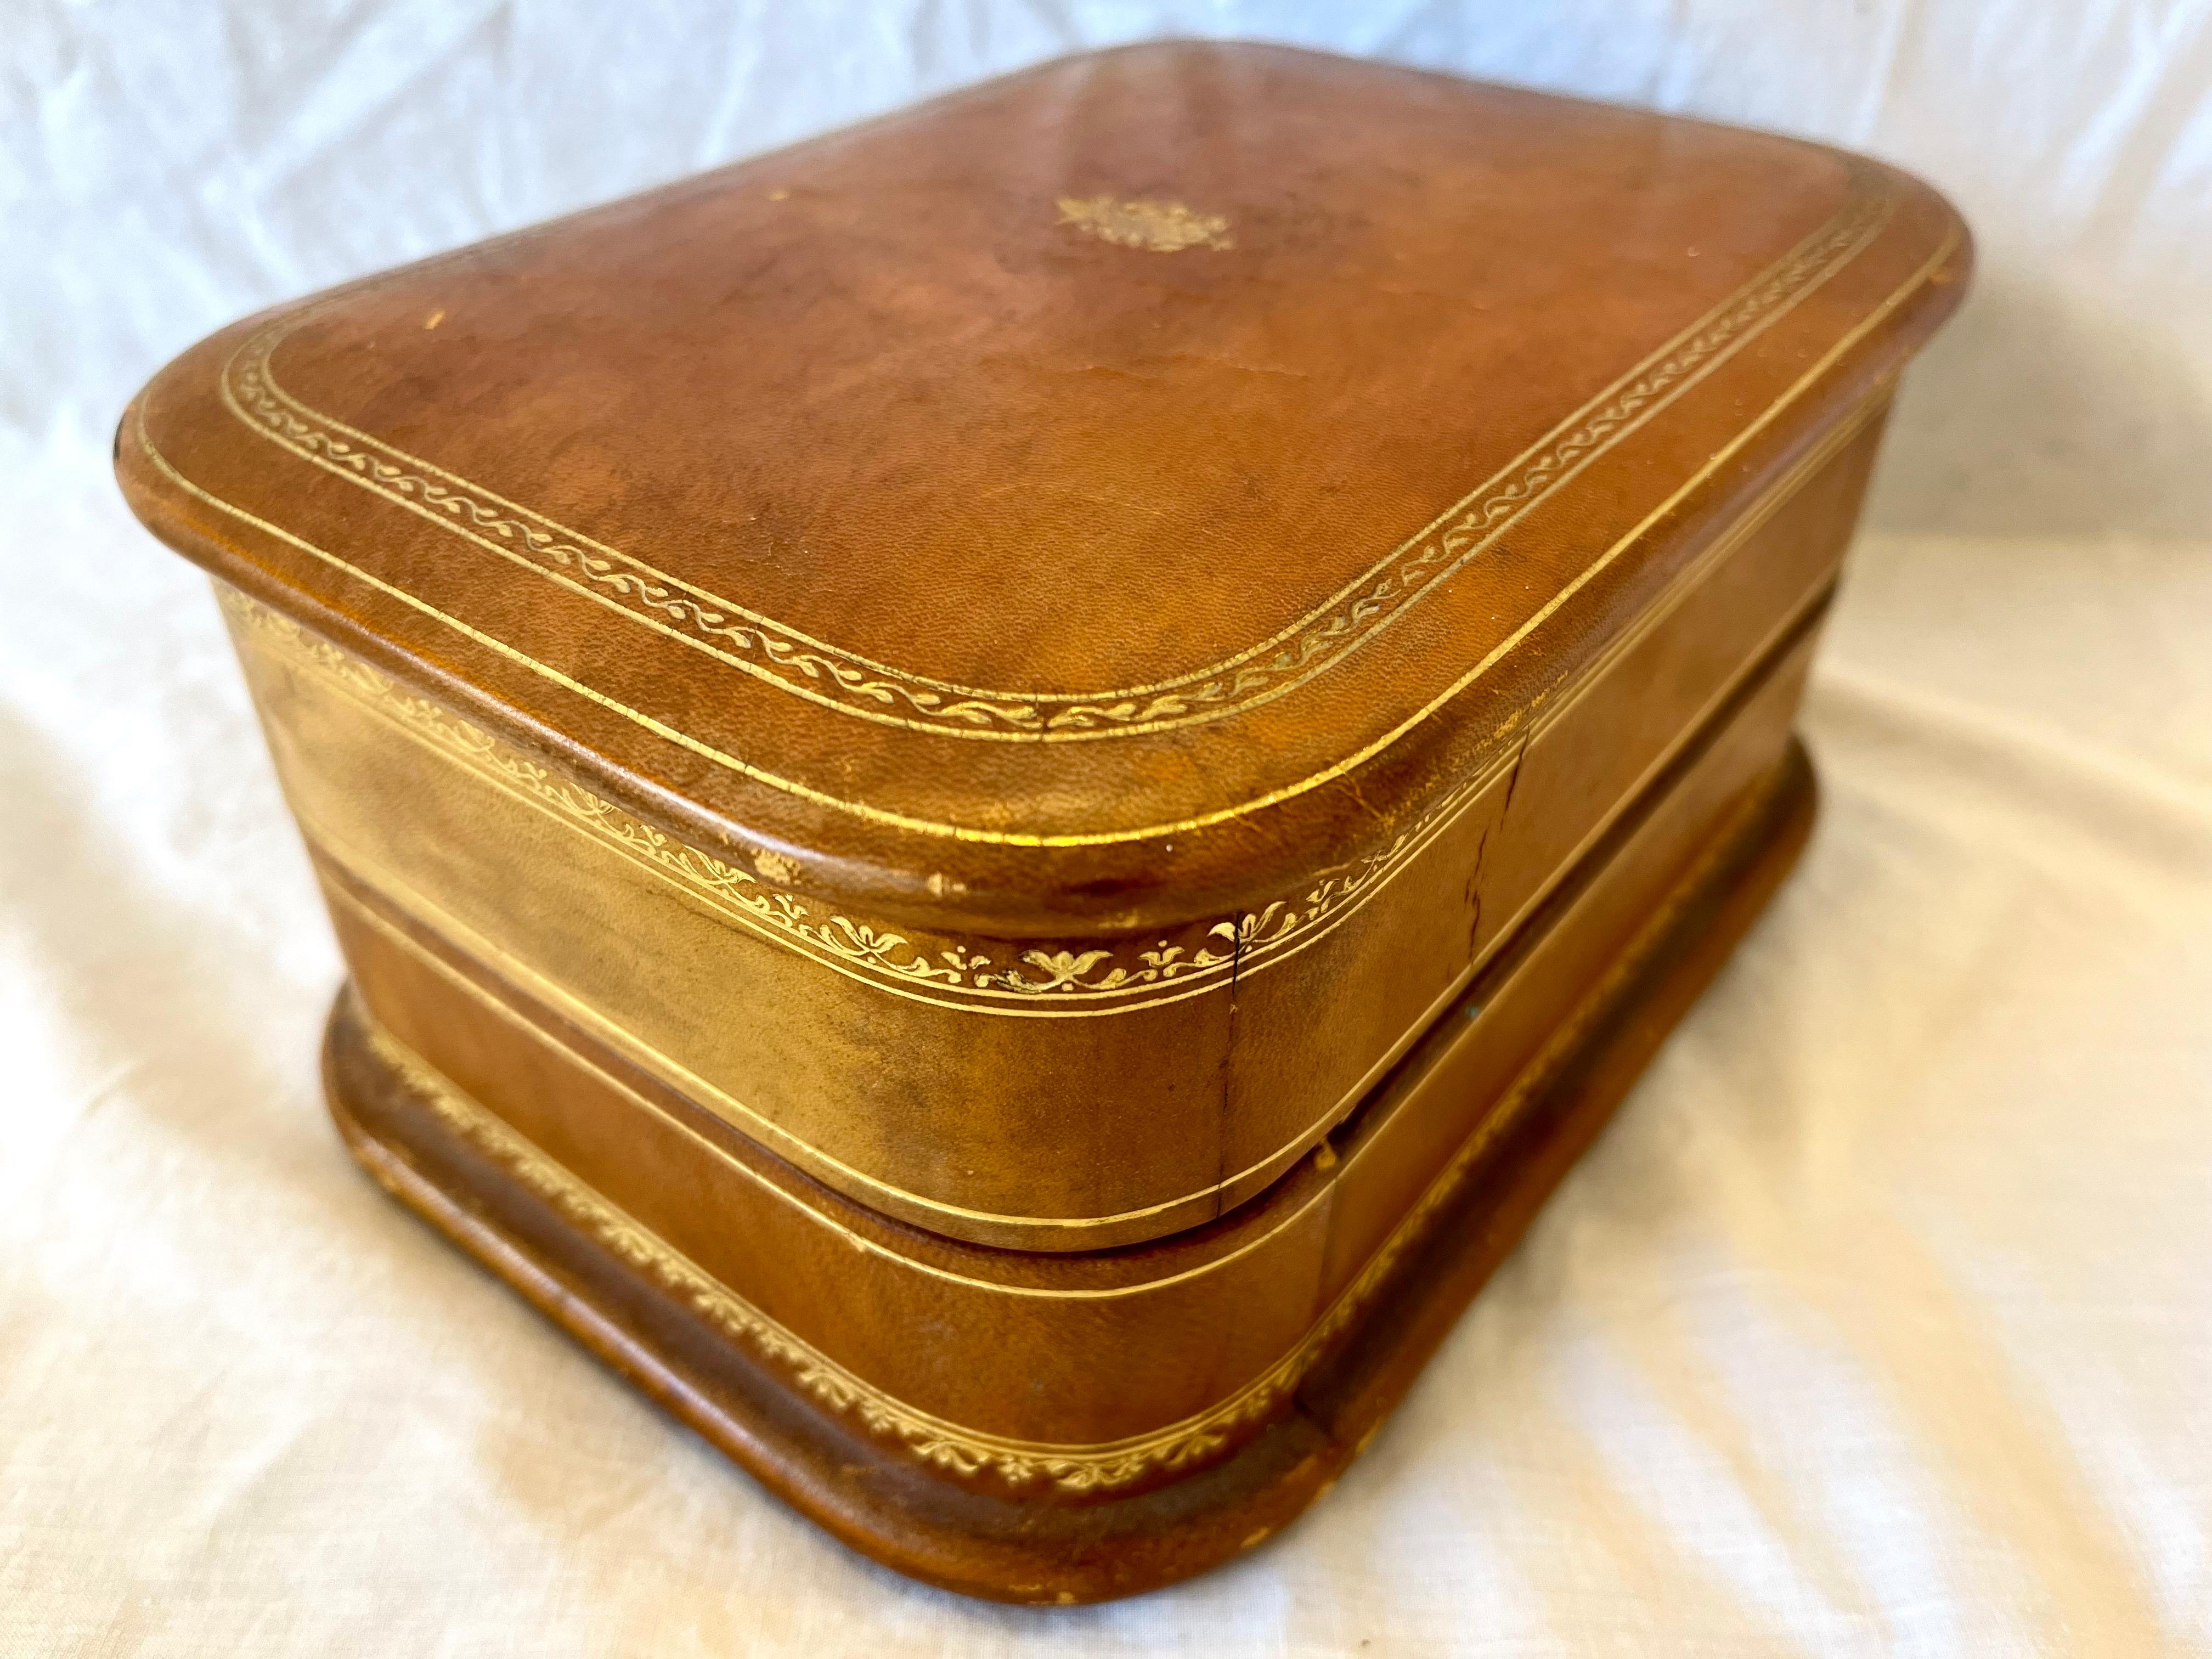 A gorgeous mid century Italian stencil gilt leather hinged top jewelry casket or box with suede lined interiors, swing out tray and two fitted pillows. This Italian box was ‘made expressly for Saks Fifth Avenue’ in New York City. The patina on the